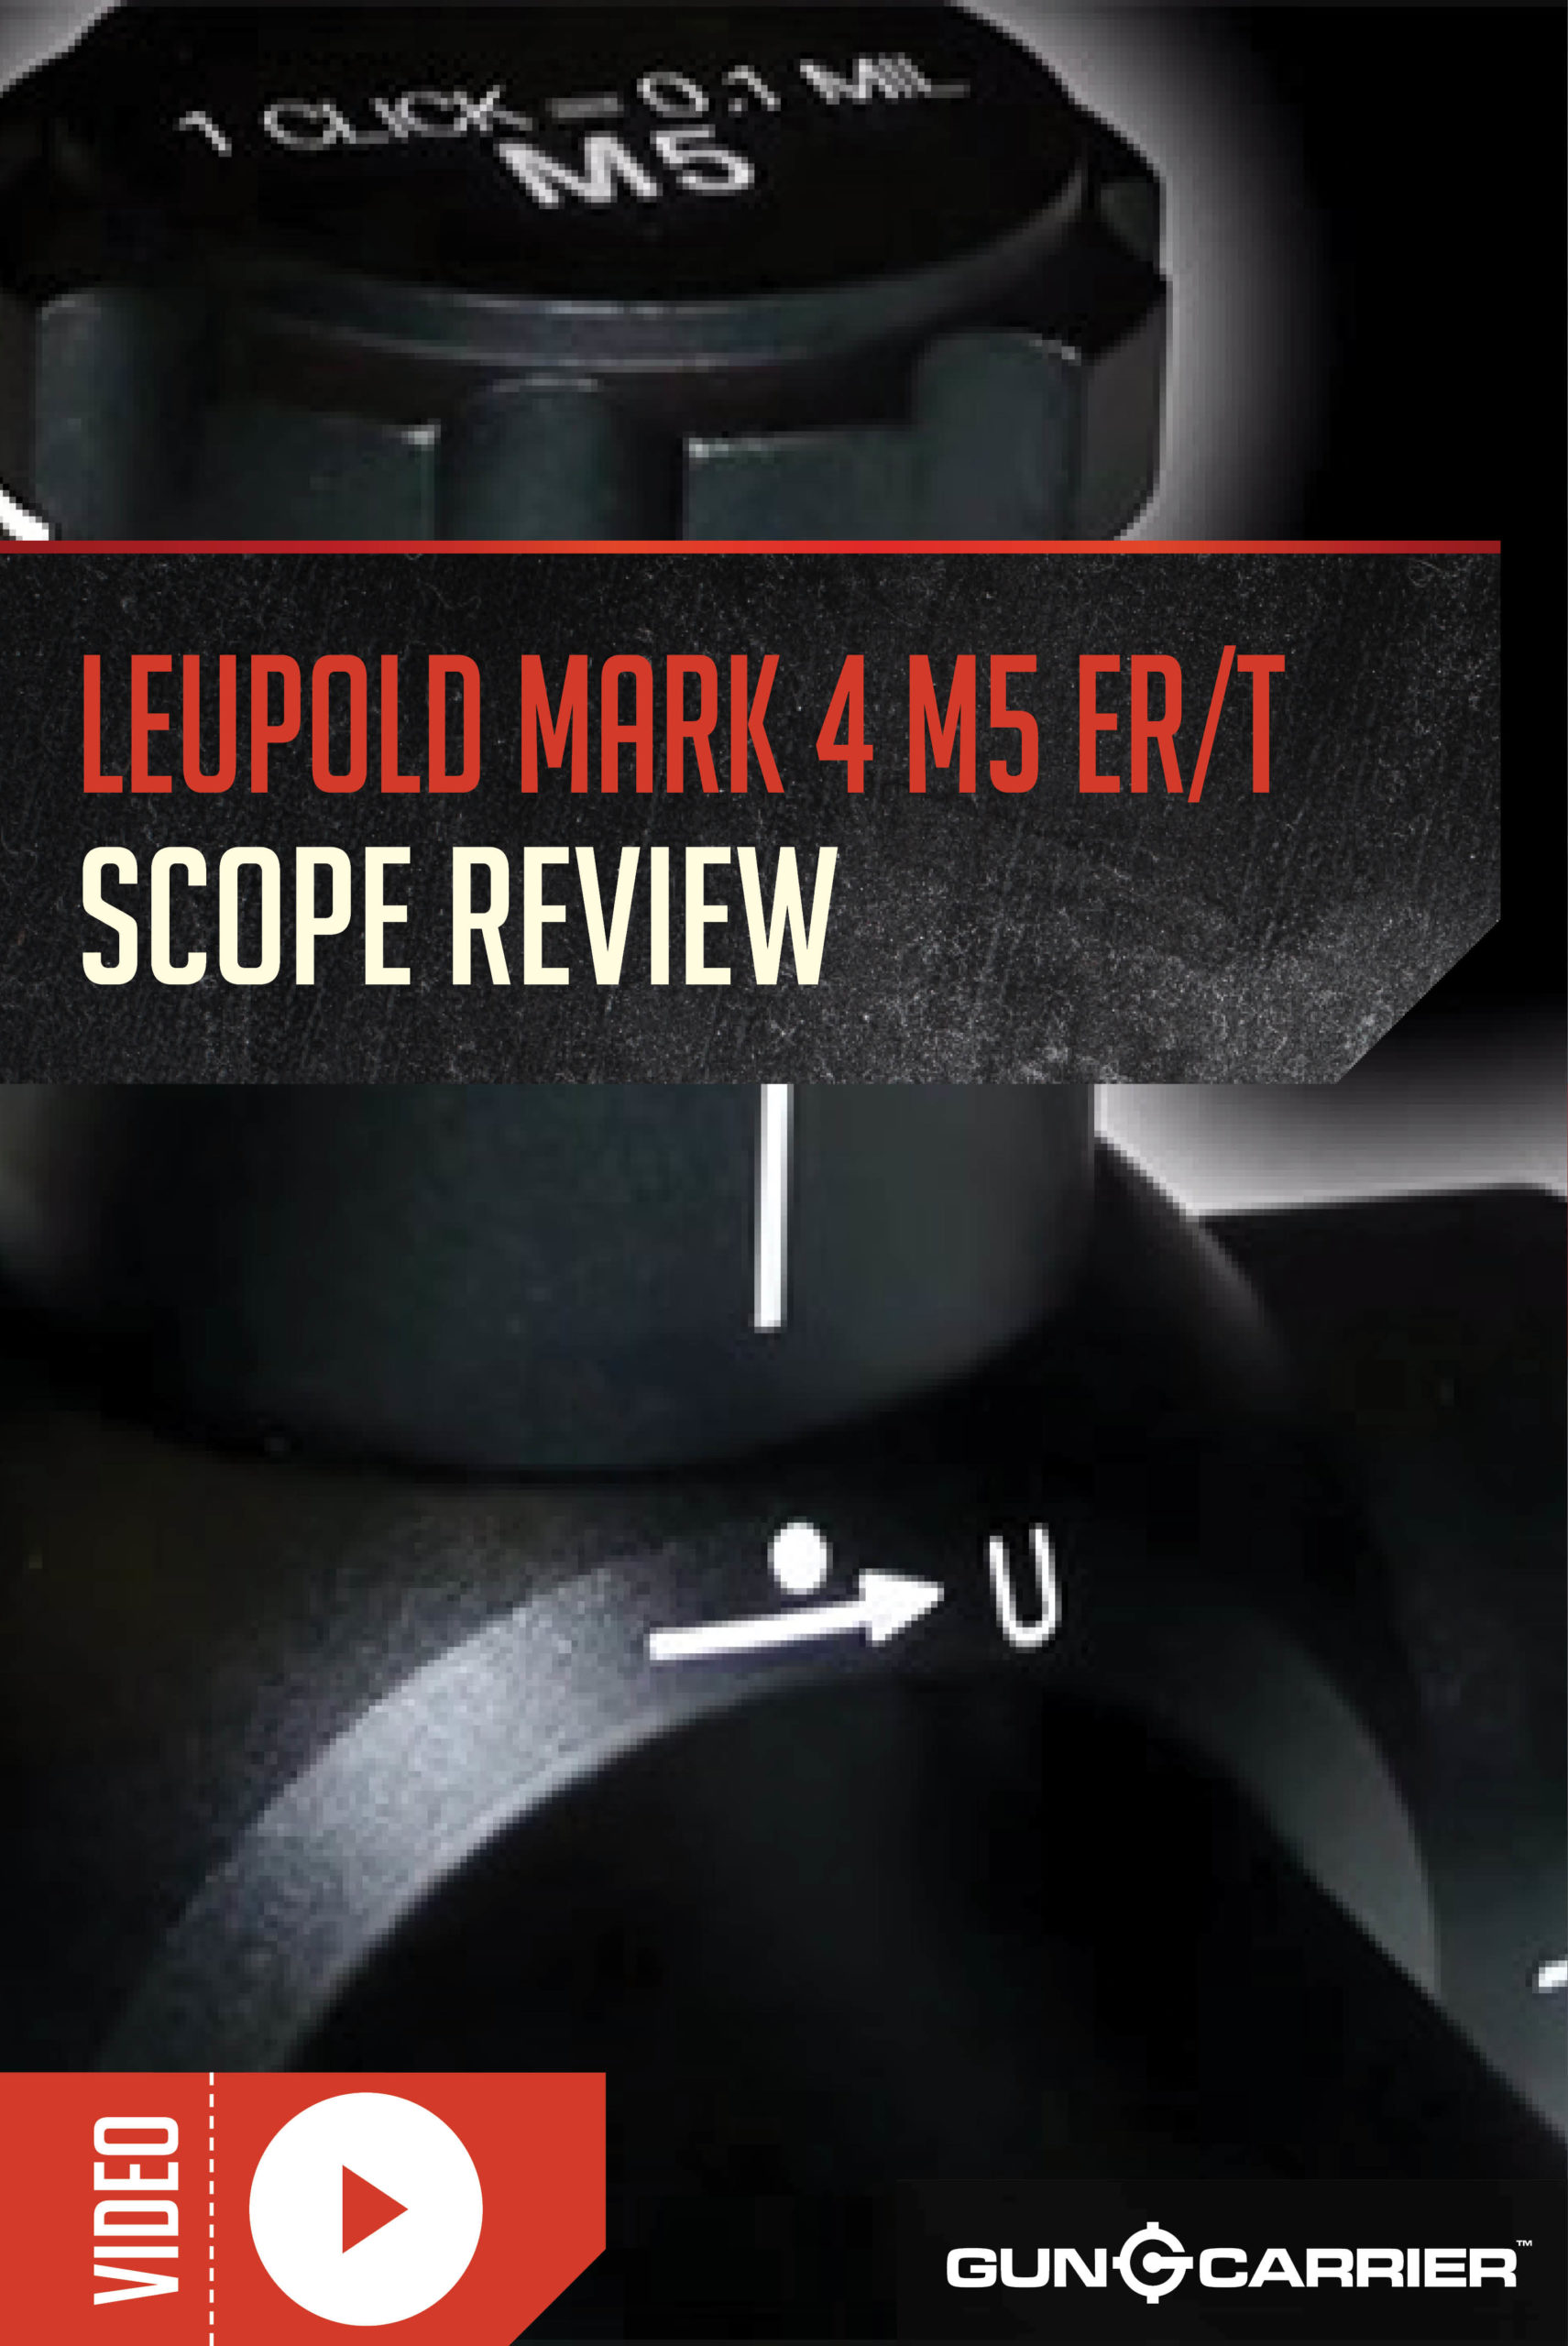 Product Review: Leupold Mark 4 M5 ER/T Scope by Gun Carrier at https://guncarrier.com/leupold-mark-4-m5-ert/